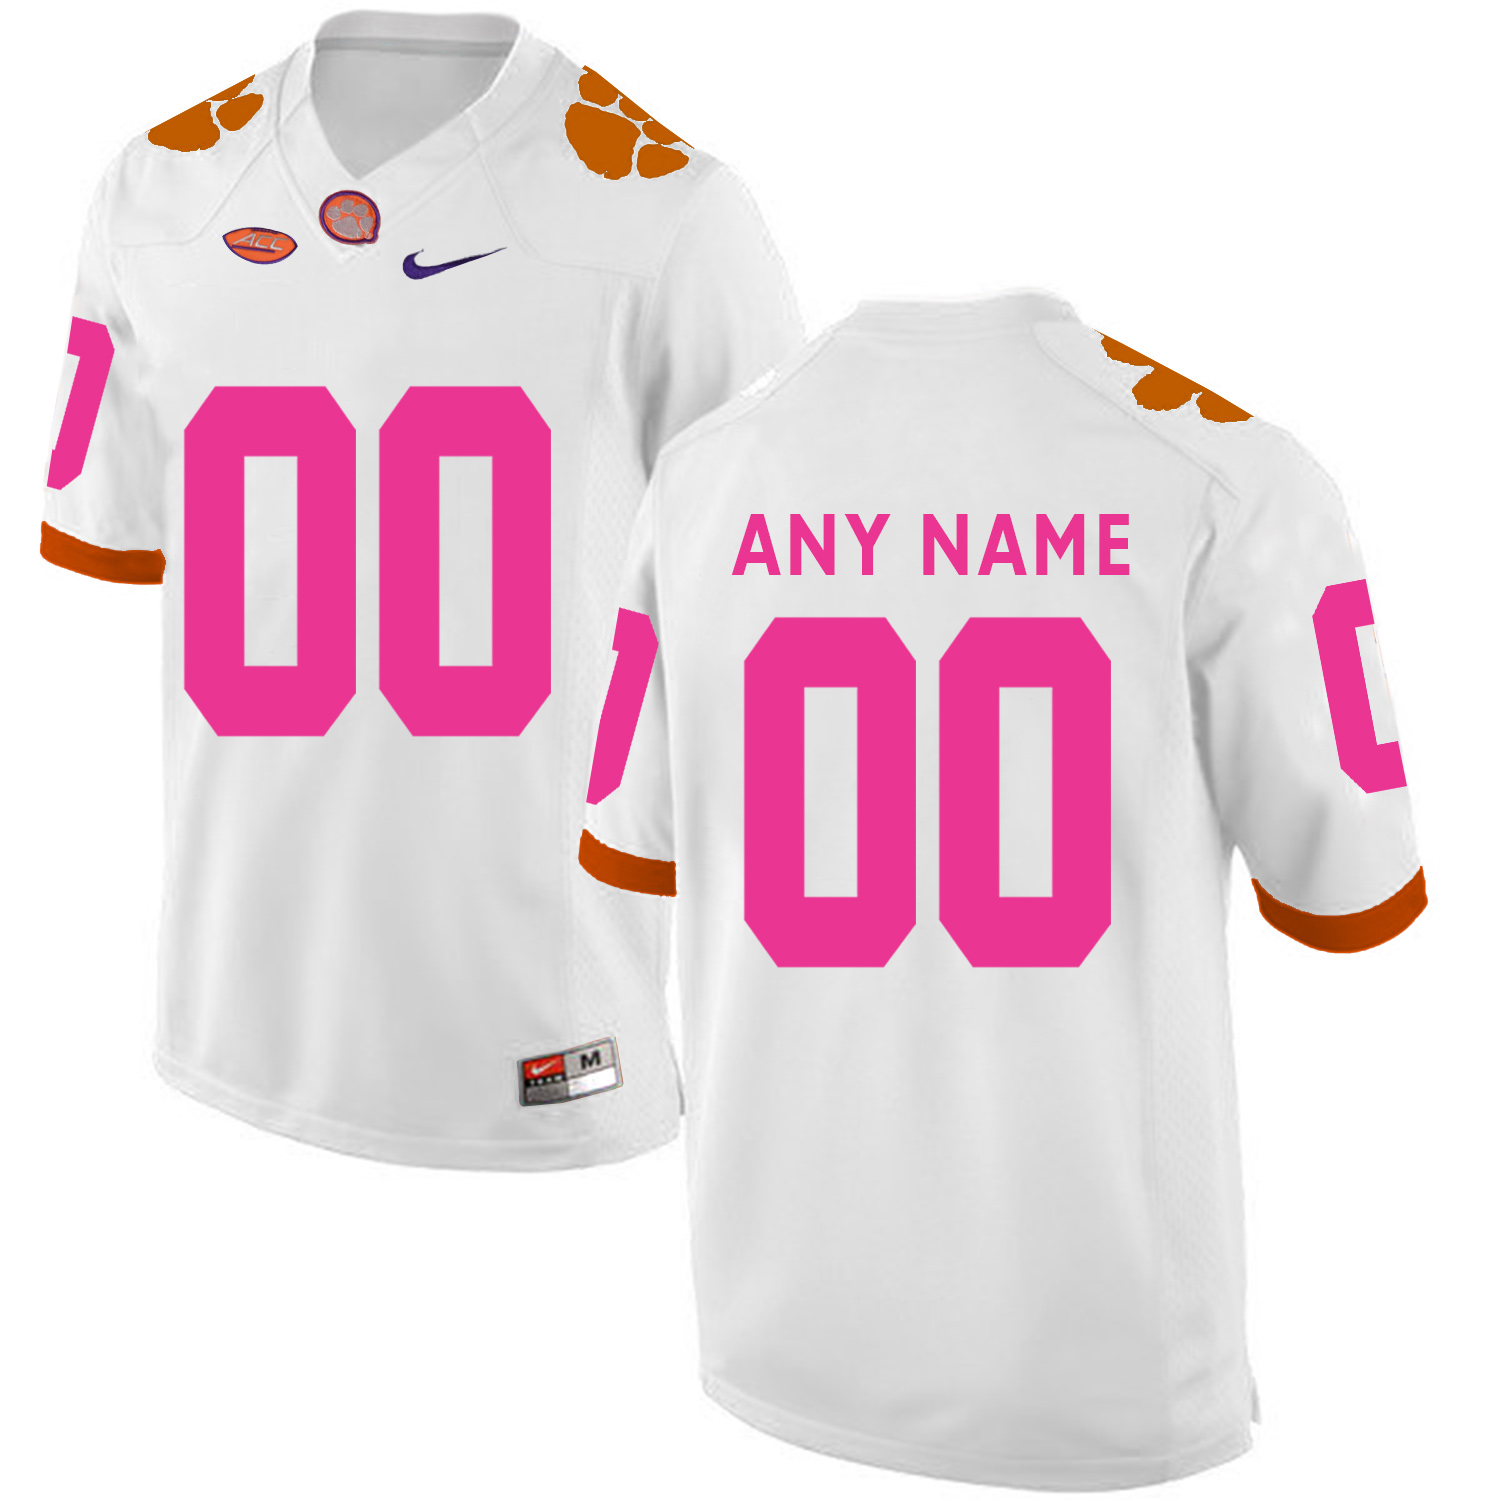 Clemson Tigers White Men's Customized 2018 Breast Cancer Awareness College Football Jersey